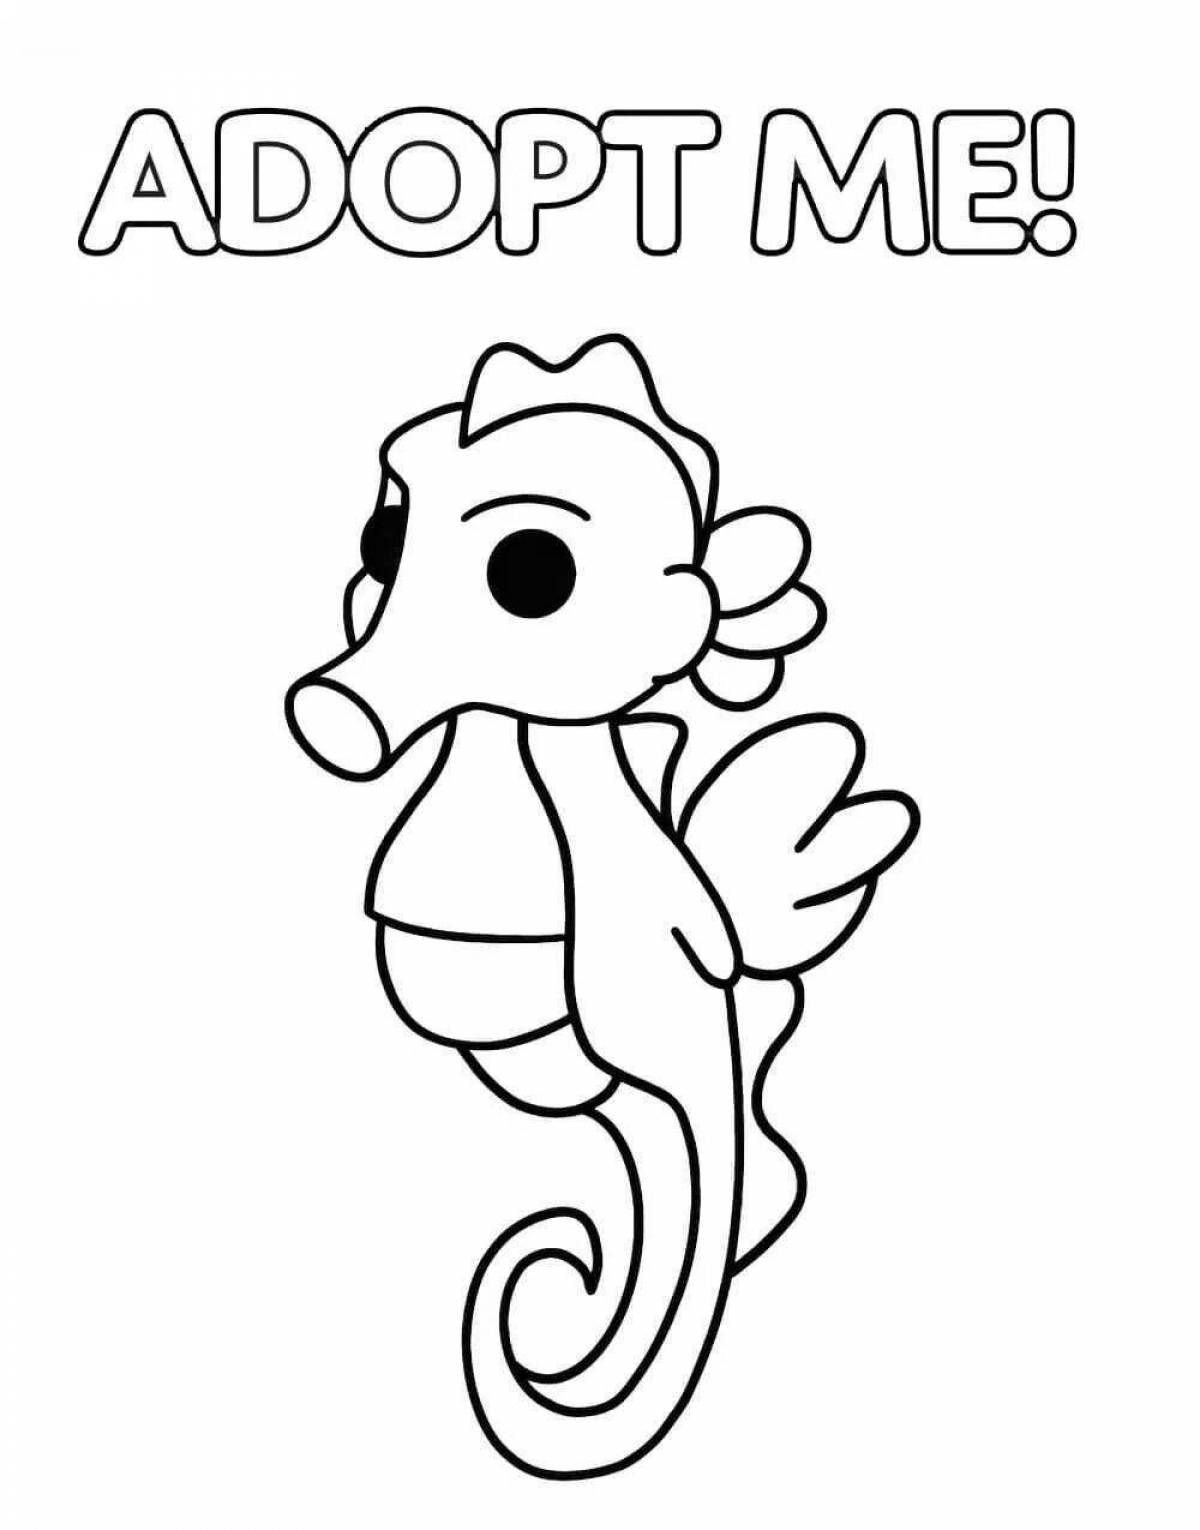 Adopt me pets incredible coloring page